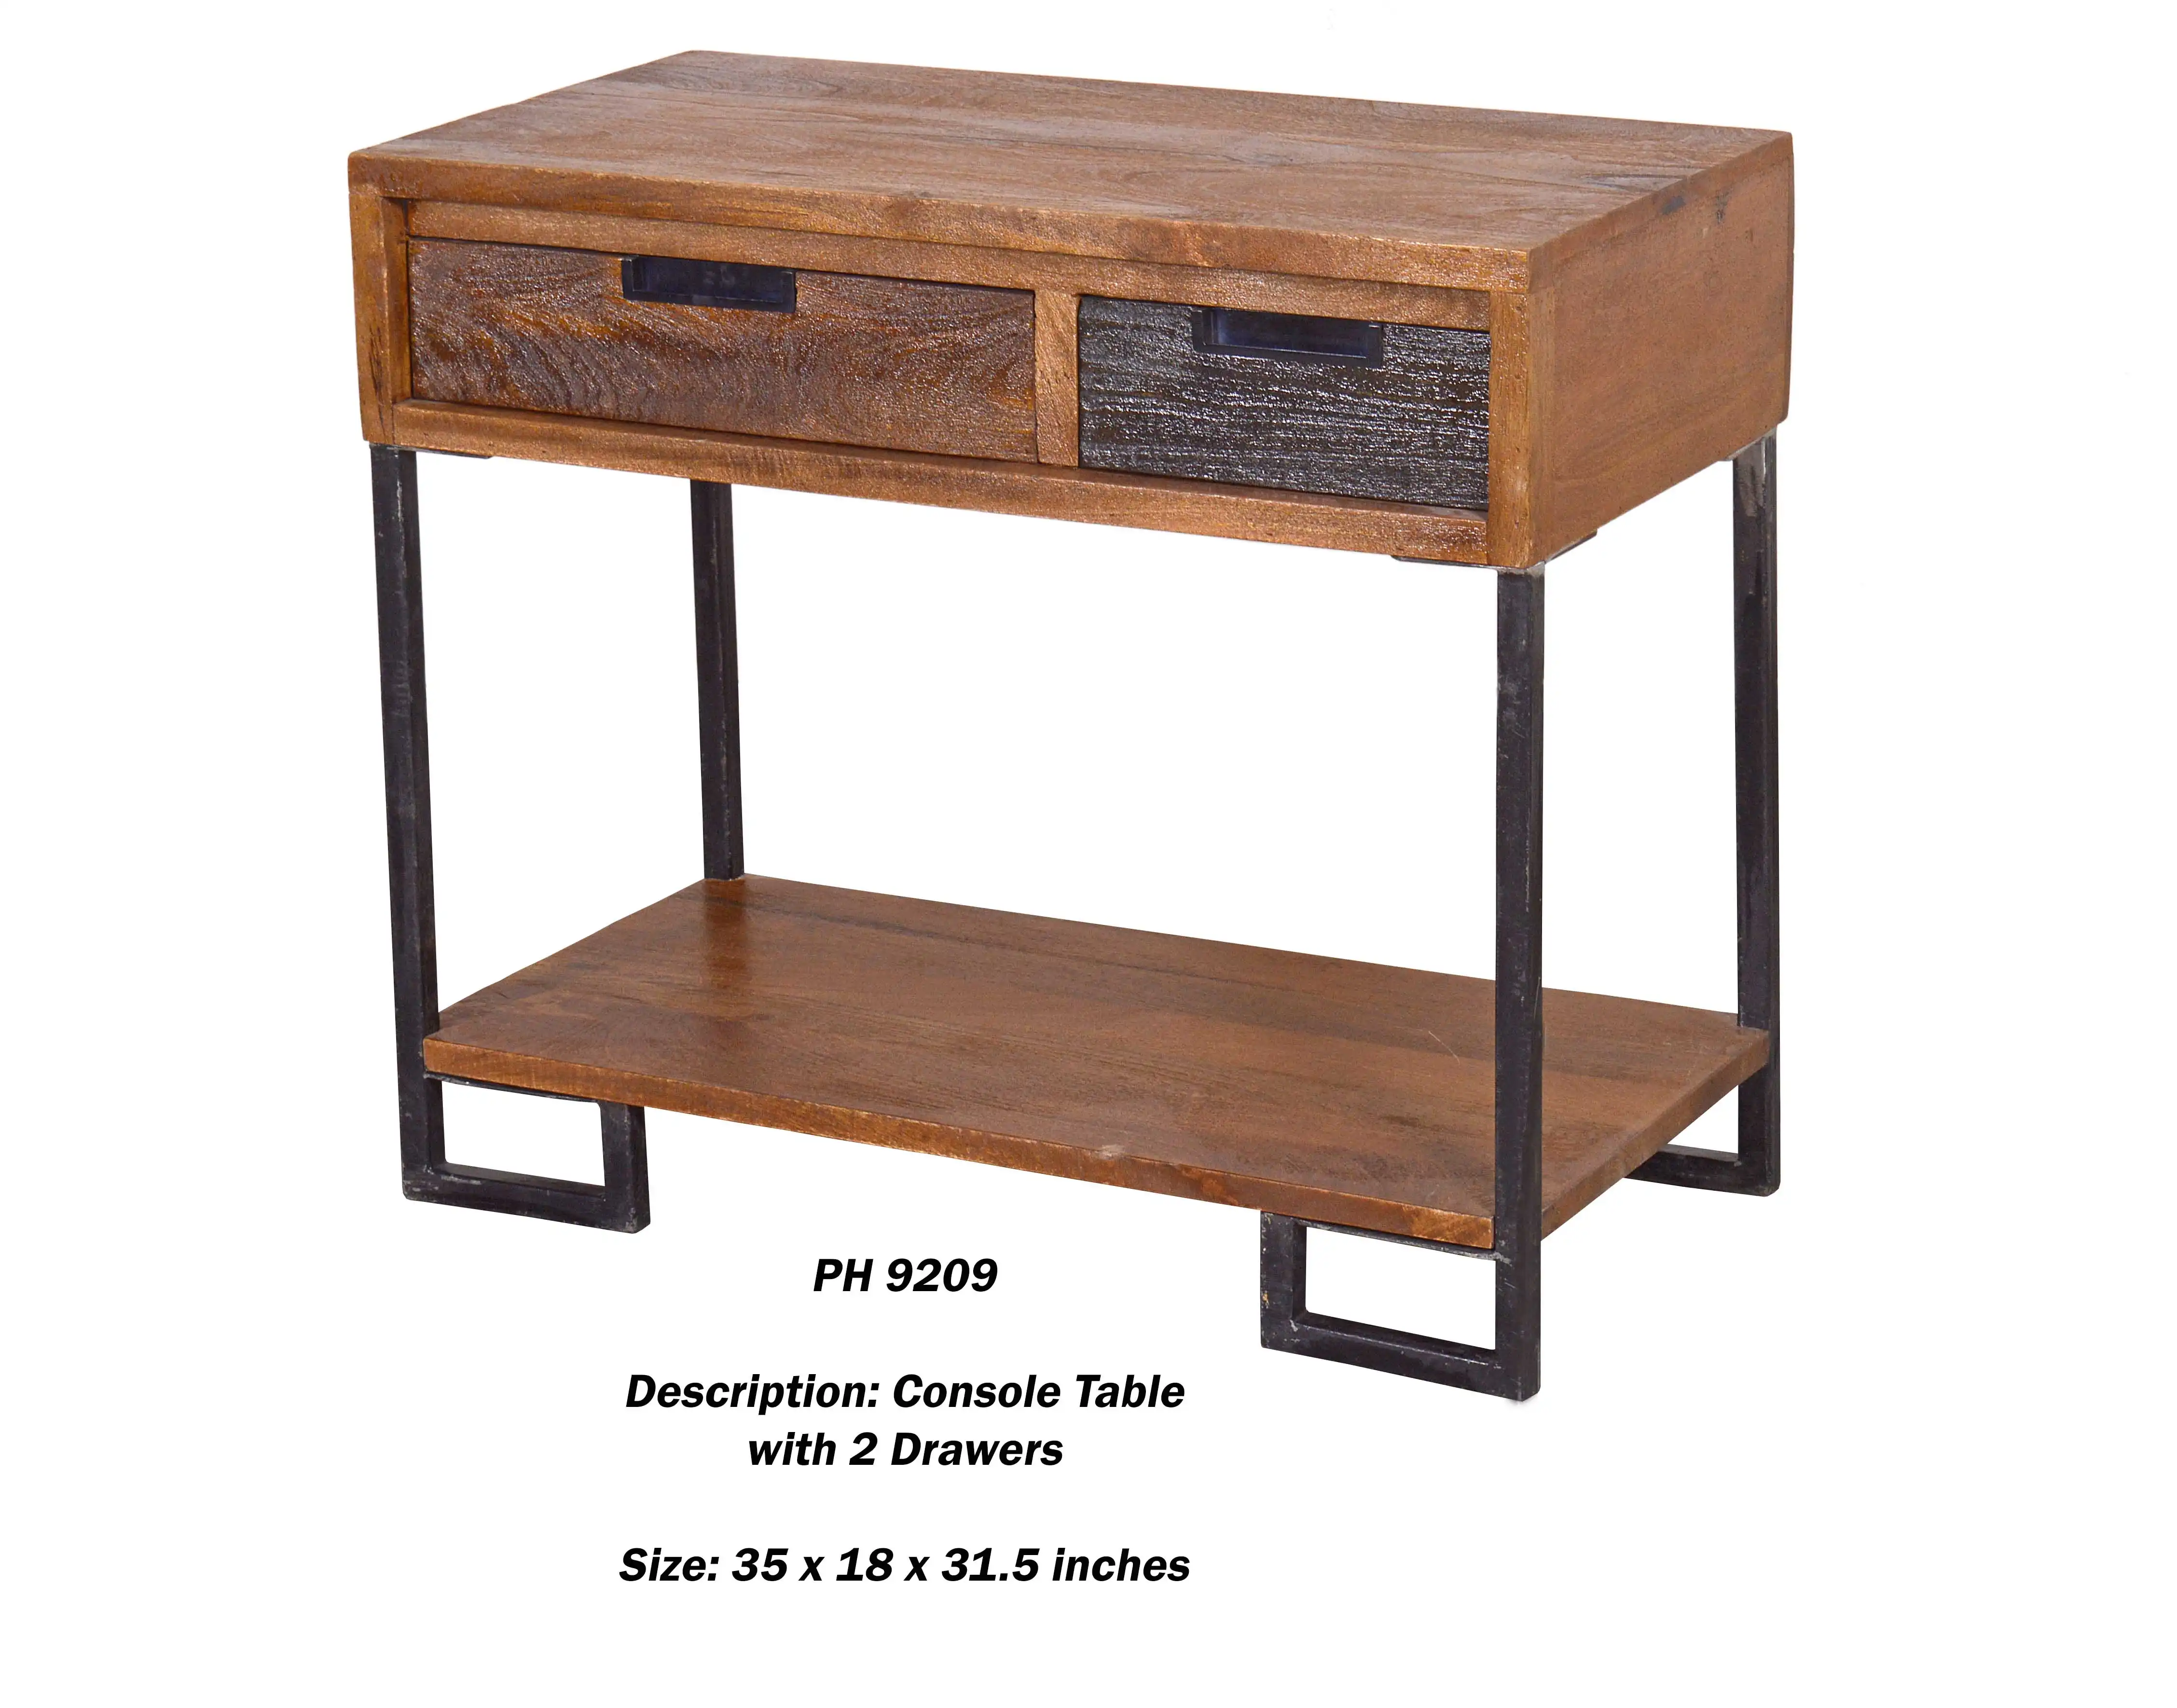 Console Table with 2 Drawers
(KD) - popular handicrafts